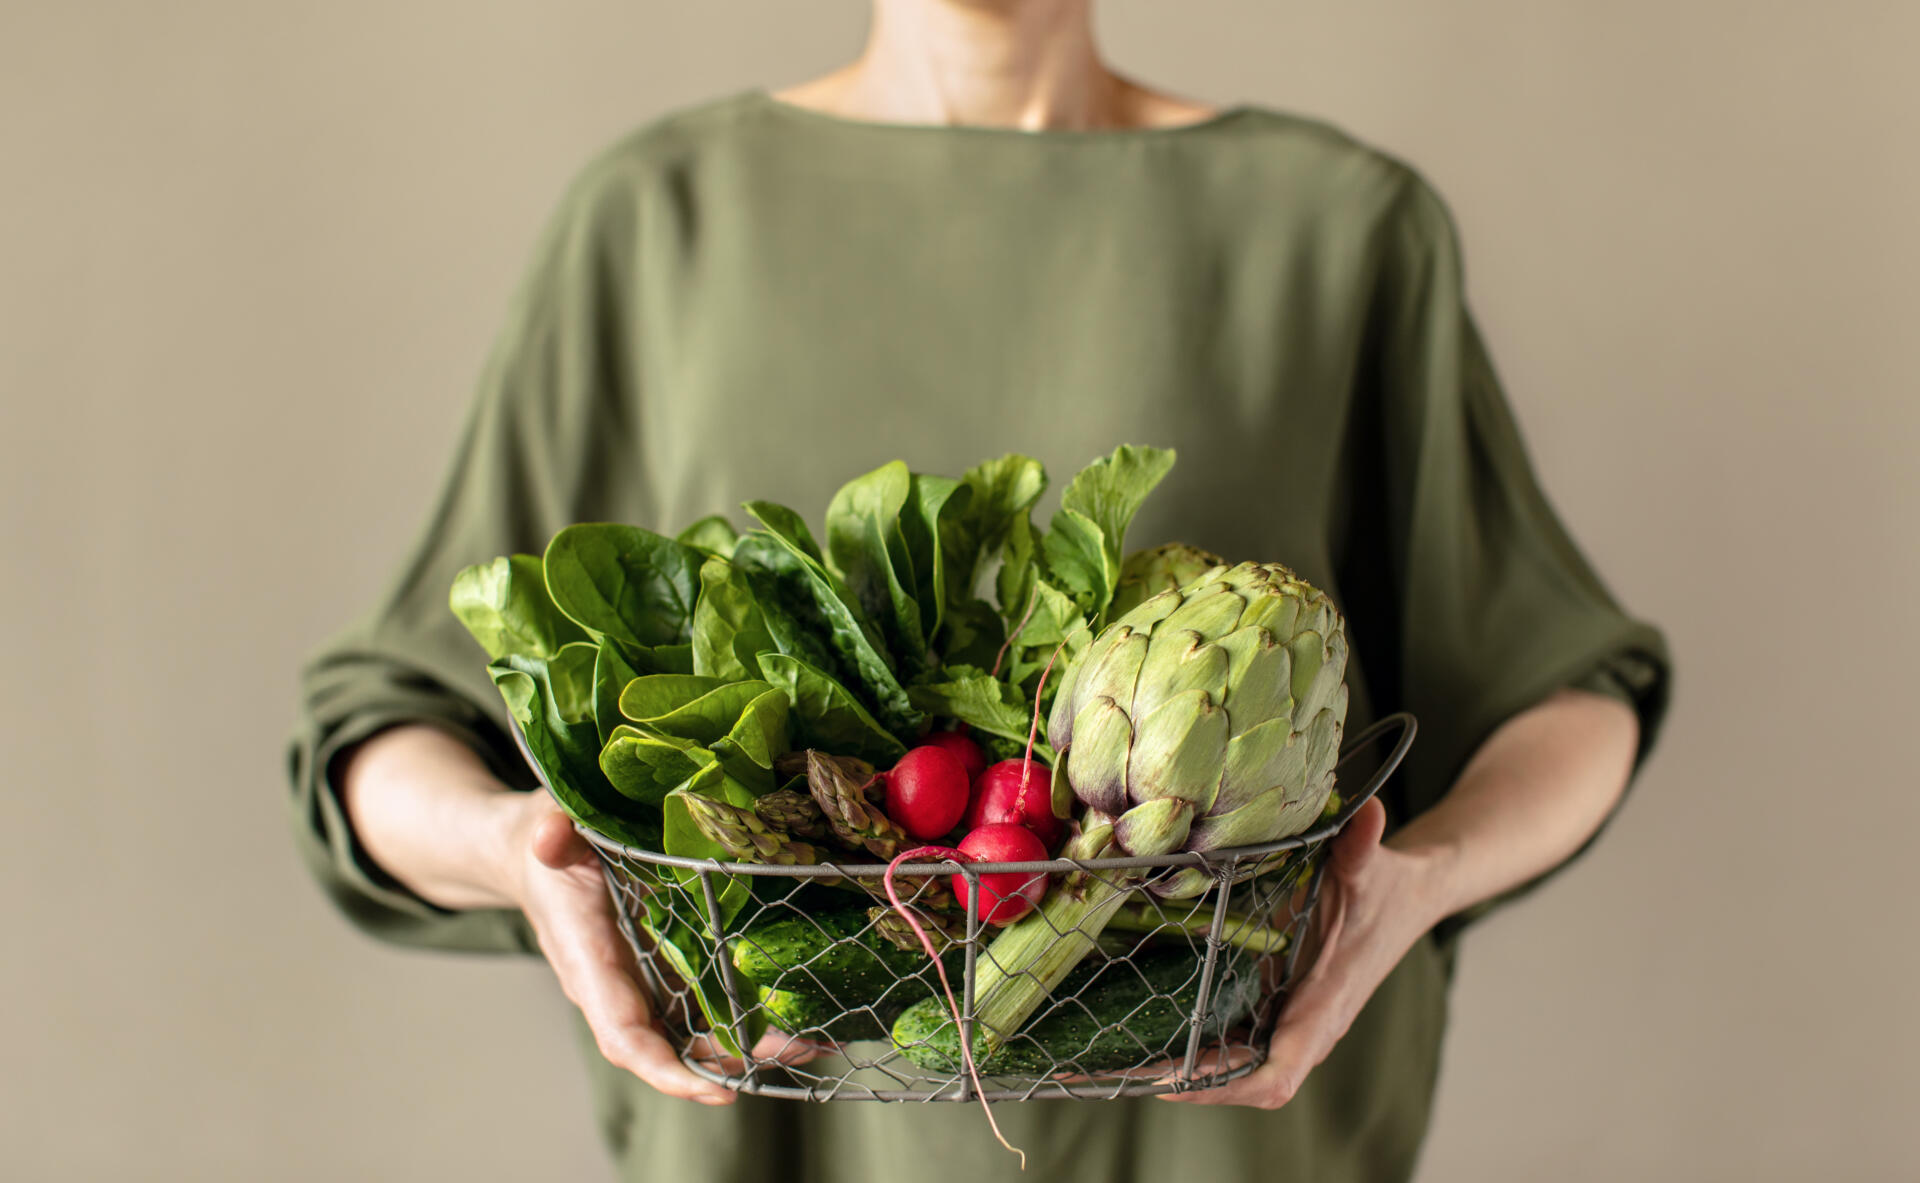 Woman holding a basket full of fresh veggie produce, healthy food, or healthy sustainable living concept